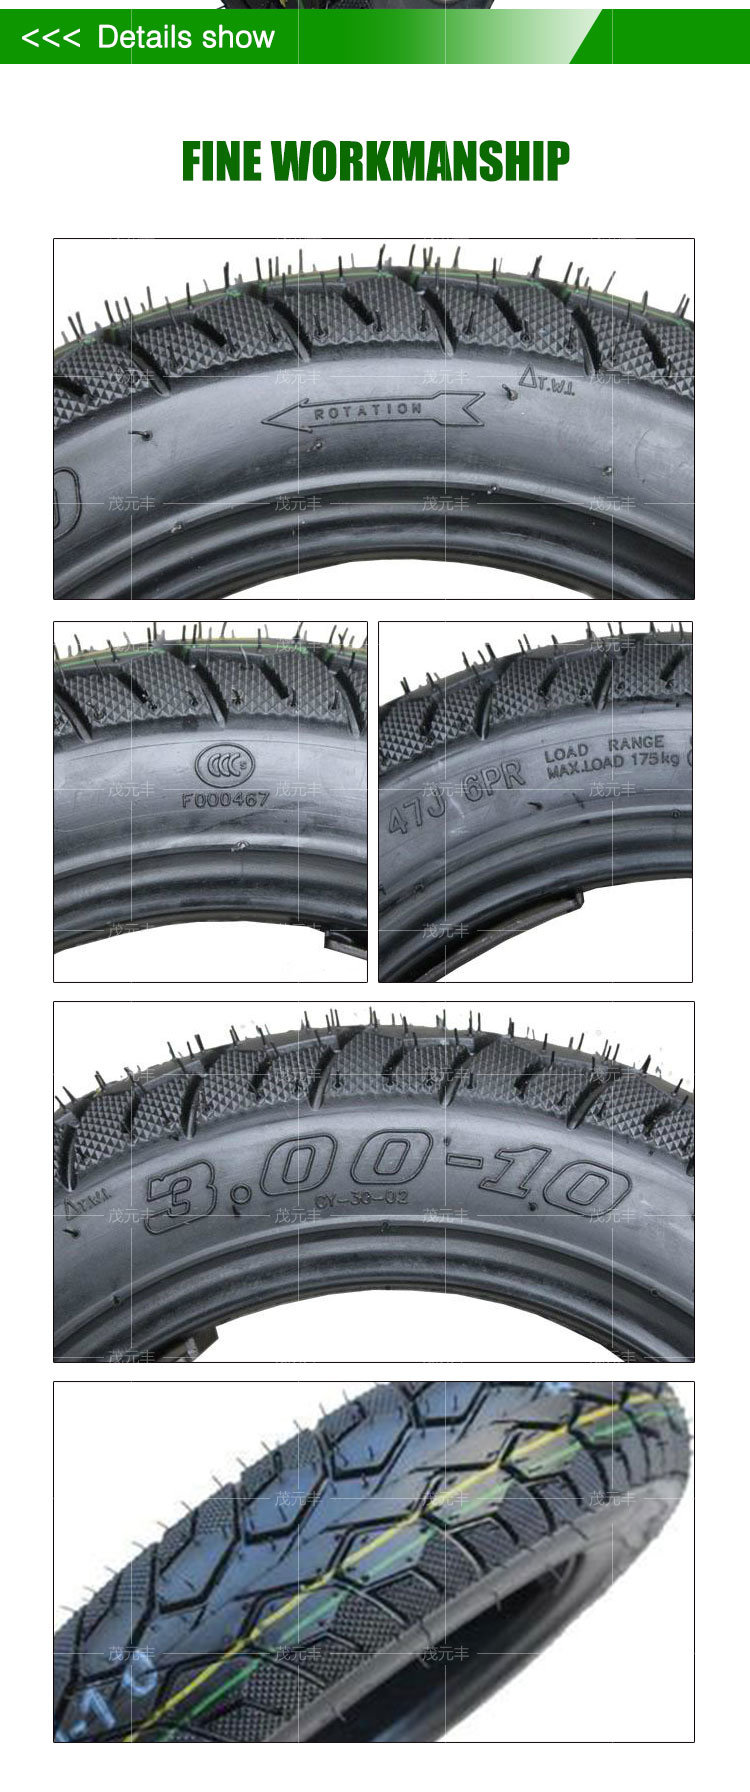 China High Quality Scooter Rear Tyre 3.00-10 Motorcycle Tubeless Tire